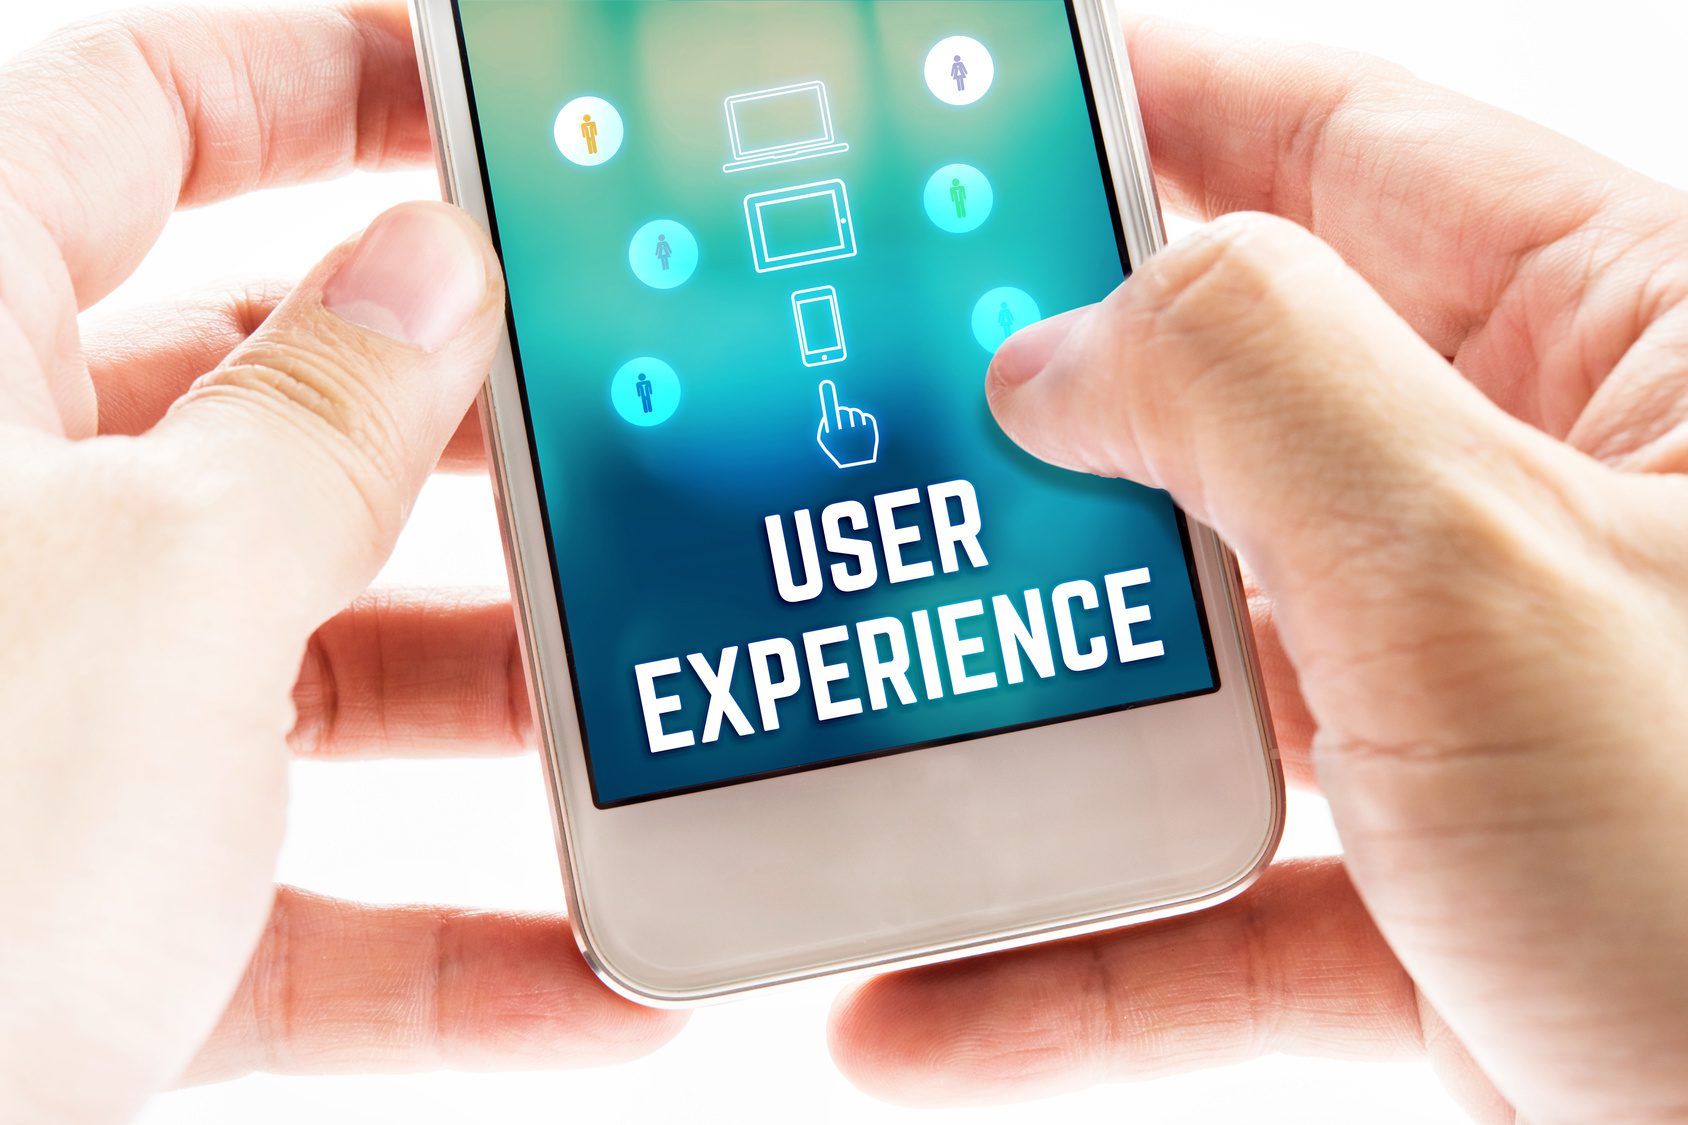 What Is User Experience?